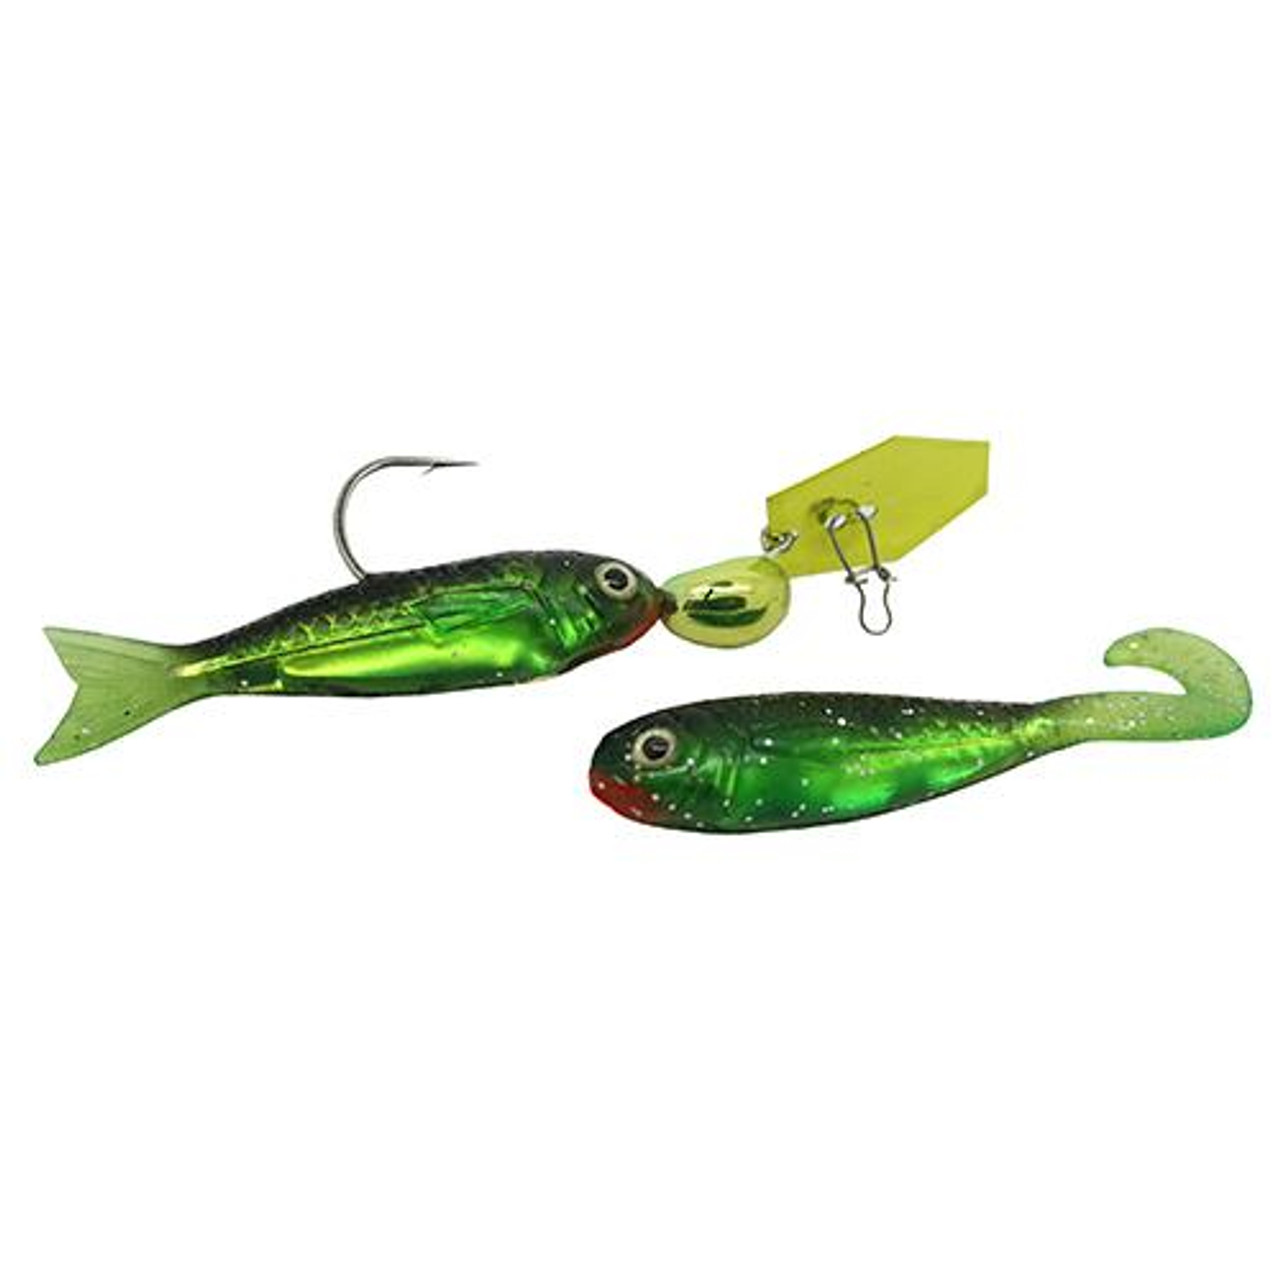 Z-man ChatterBait Flashback Mini Lures 1/8 oz Weight, Chartreuse/ Fire  Tiger, Per 1, CB-FBMINI18-08